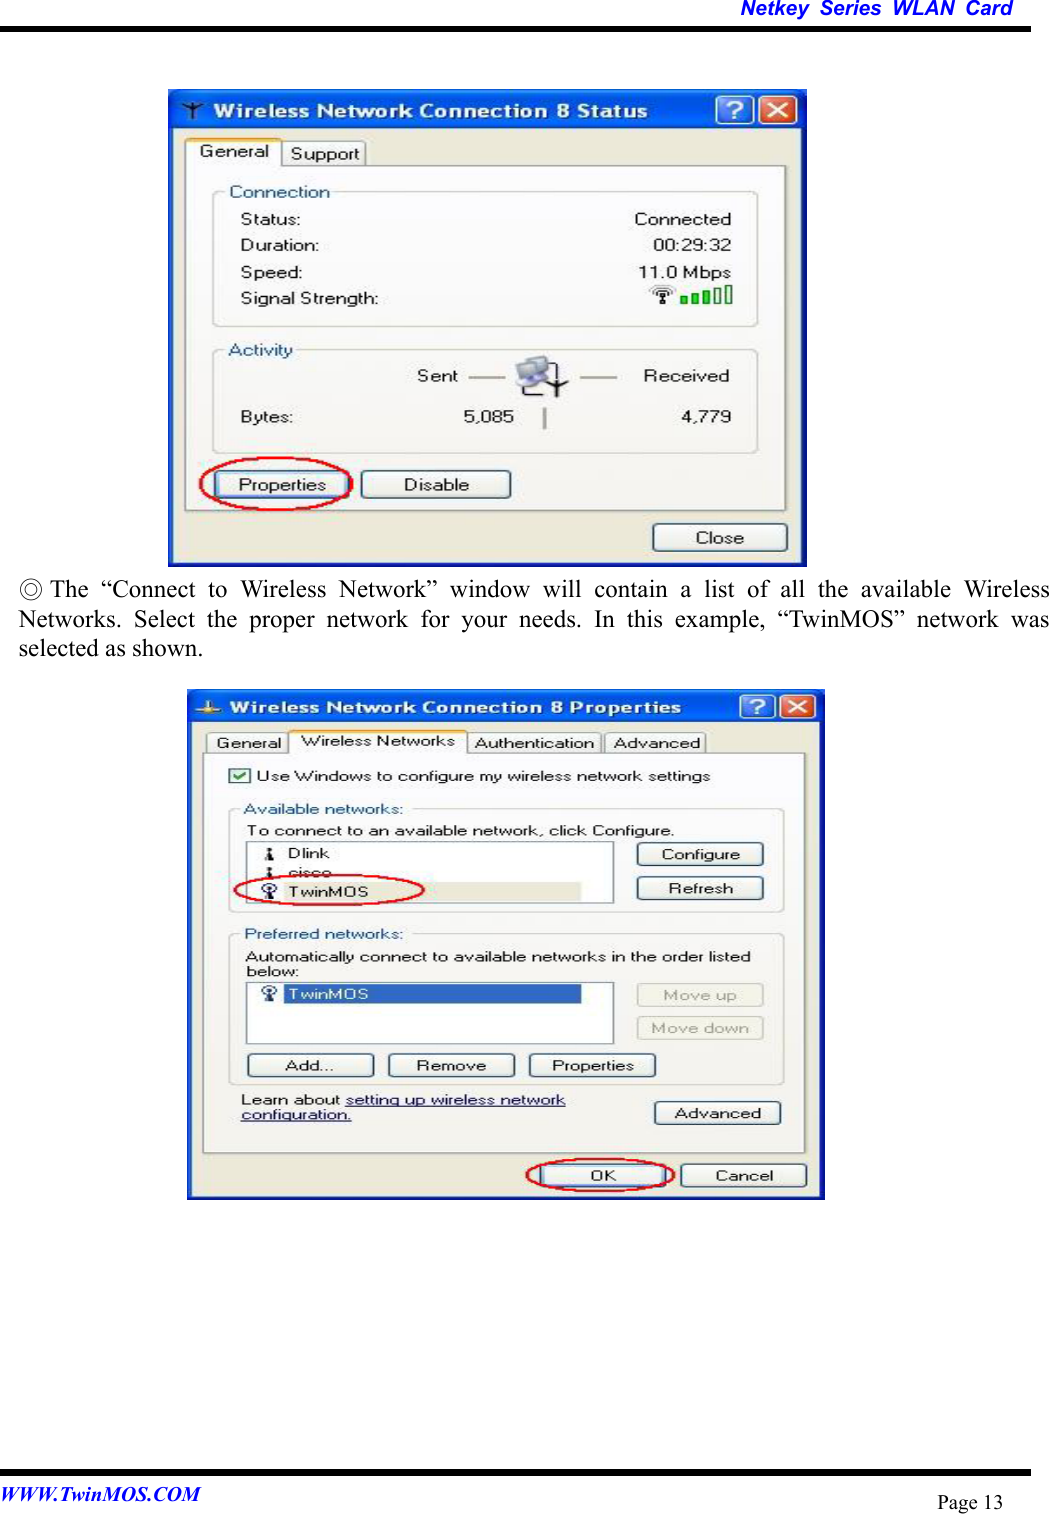   Netkey Series WLAN Card WWW.TwinMOS.COM  Page 13             ◎ The “Connect to Wireless Network” window will contain a list of all the available Wireless Networks. Select the proper network for your needs. In this example, “TwinMOS” network was selected as shown.                    